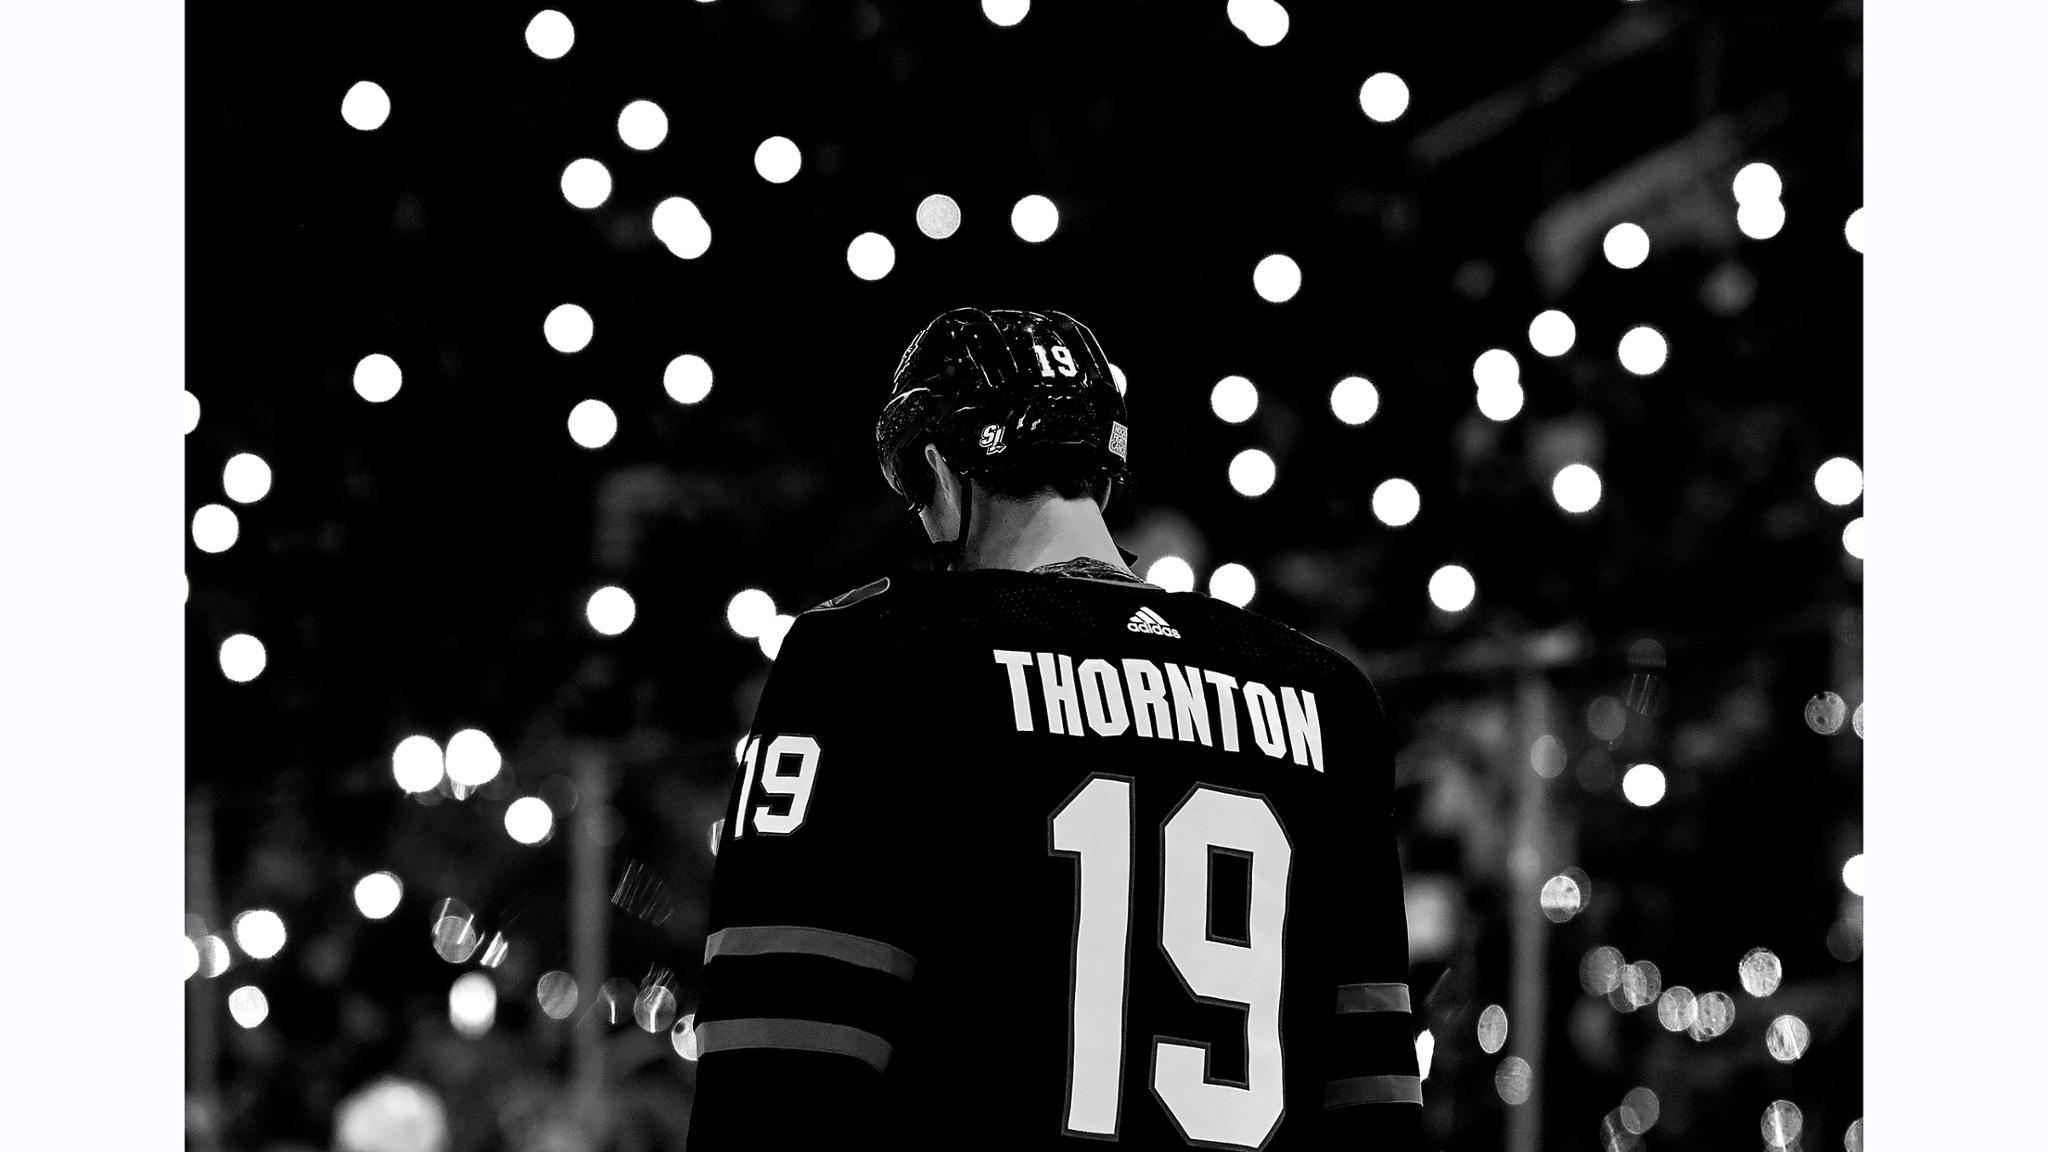 Joe Thornton of the San Jose Sharks stands for a moment